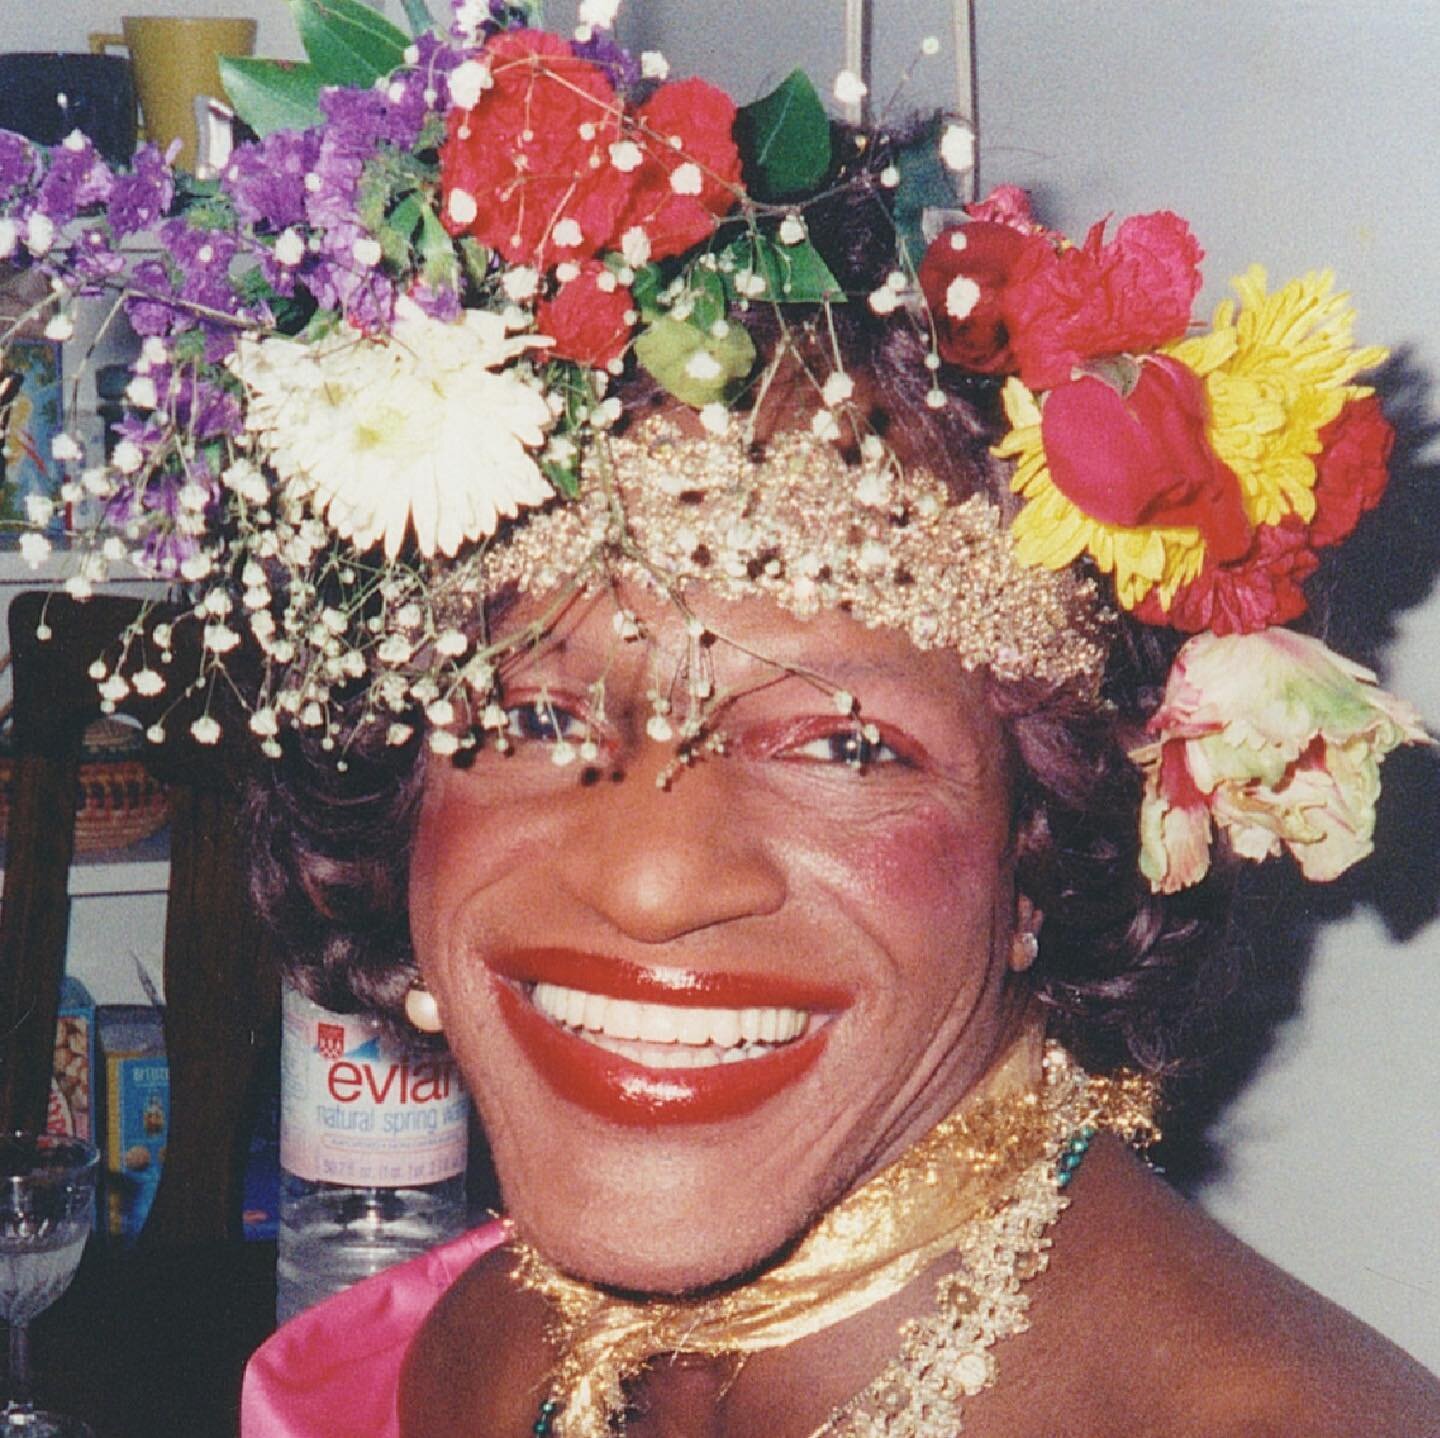 To celebrate the official day of #pride we&rsquo;ll like to remember one of the prominent figures that actively stood up for LGBT+ rights, Marsha P. Johnson. 💐

Thanks to her and many others June 28th became a liberation, equality and acceptance day